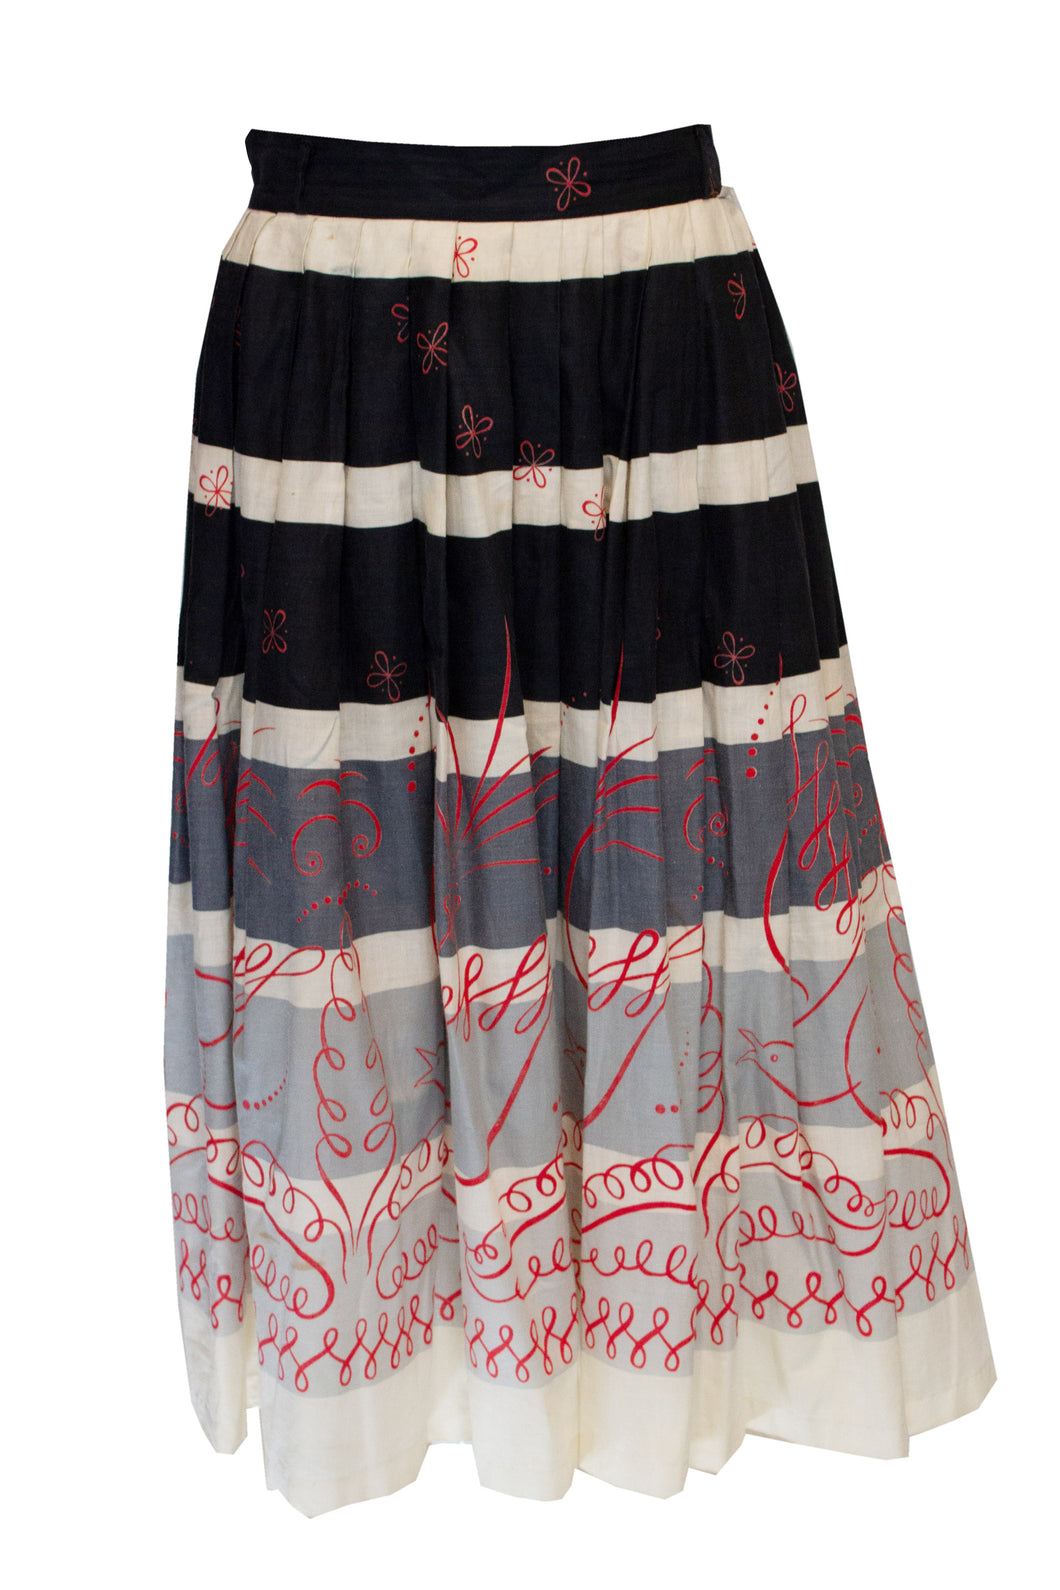 A Vintage 1950s Cruise Cotton summer Skirt